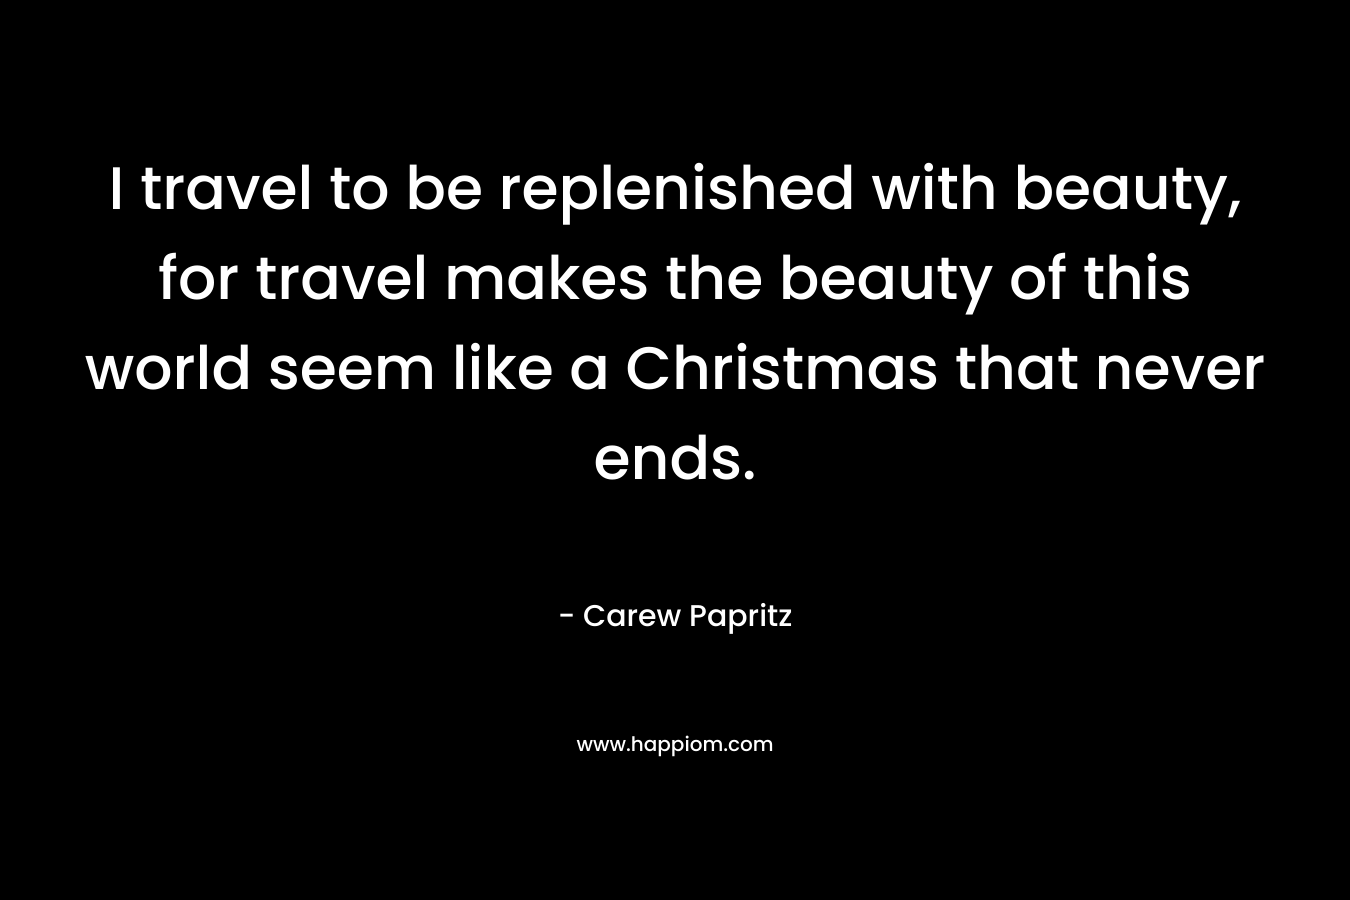 I travel to be replenished with beauty, for travel makes the beauty of this world seem like a Christmas that never ends.